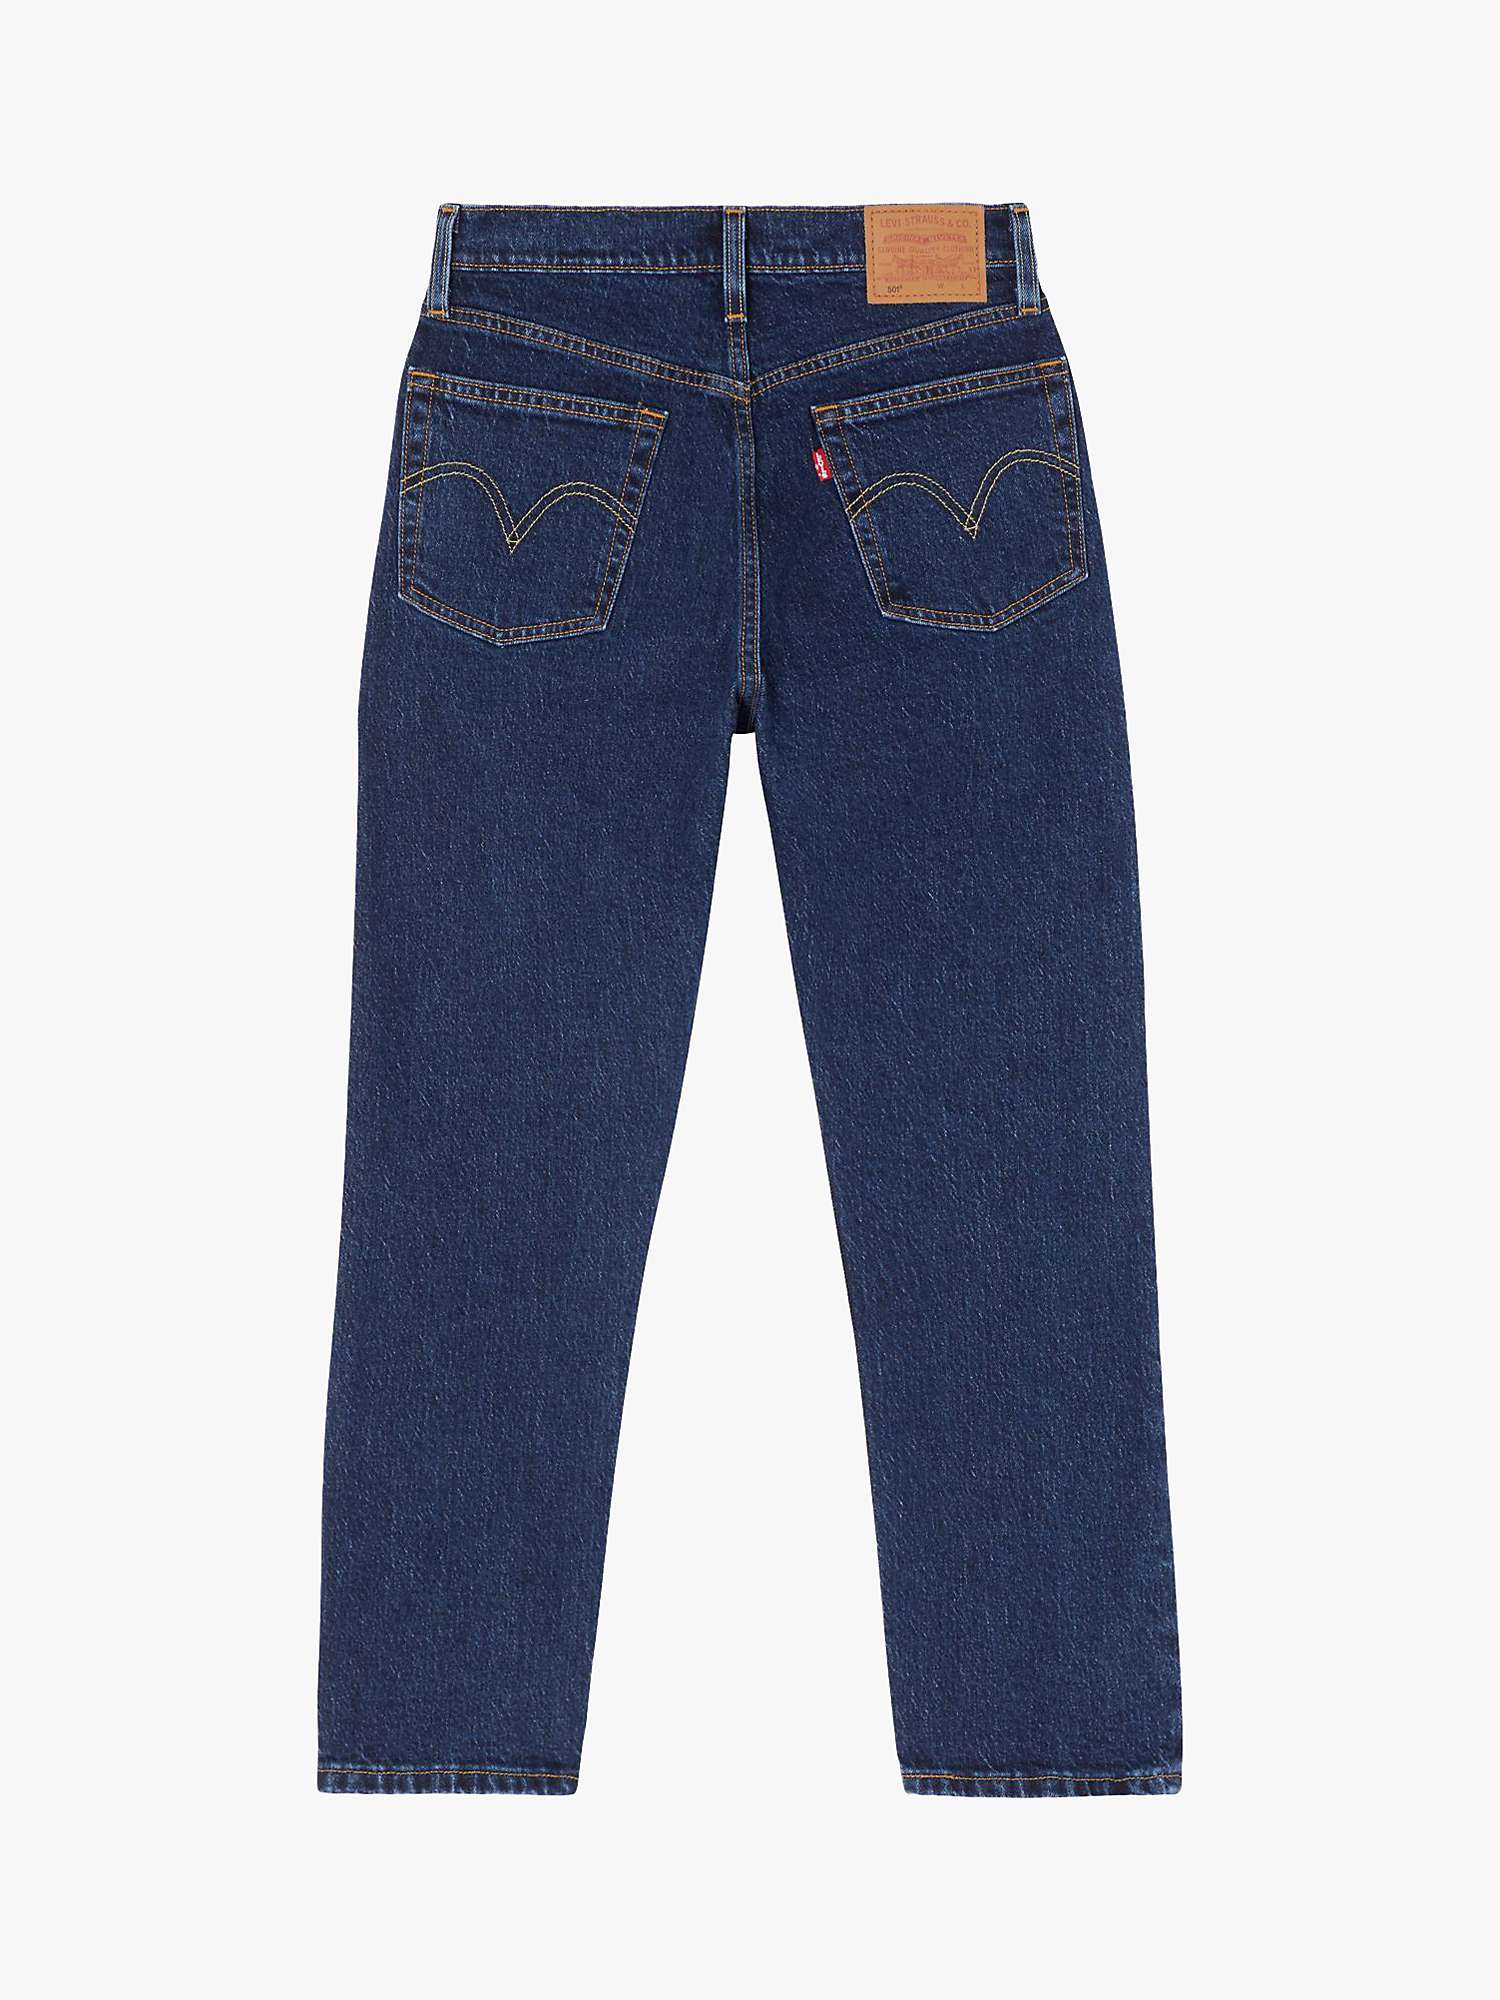 Buy Levi's 501 Cropped Jeans Online at johnlewis.com